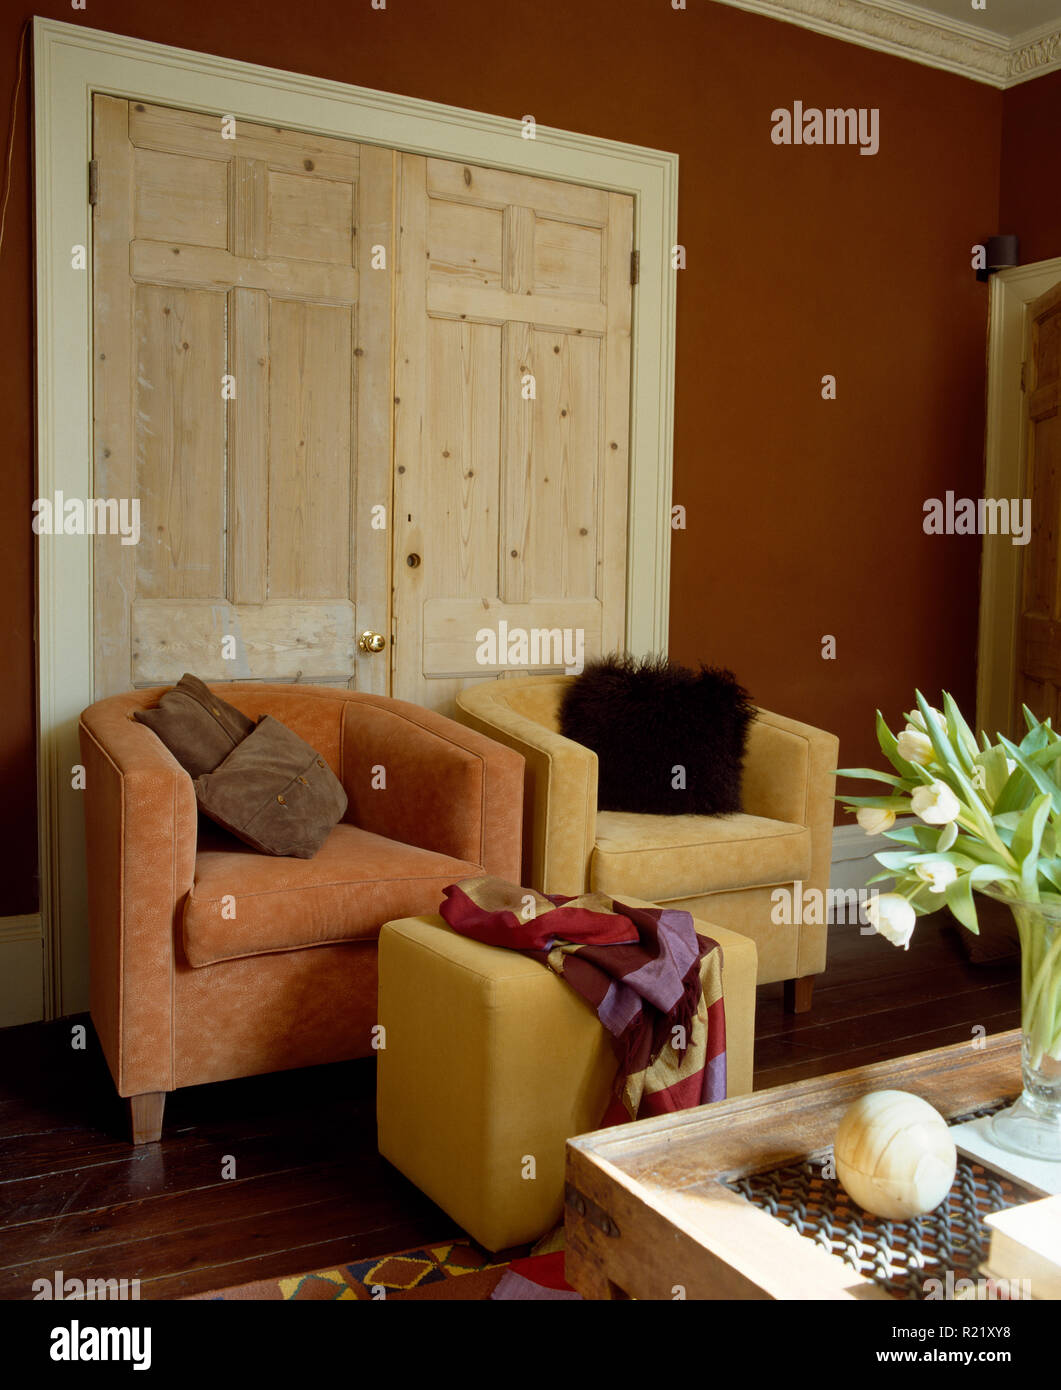 Velour armchairs in front of stripped pine double doors Stock Photo